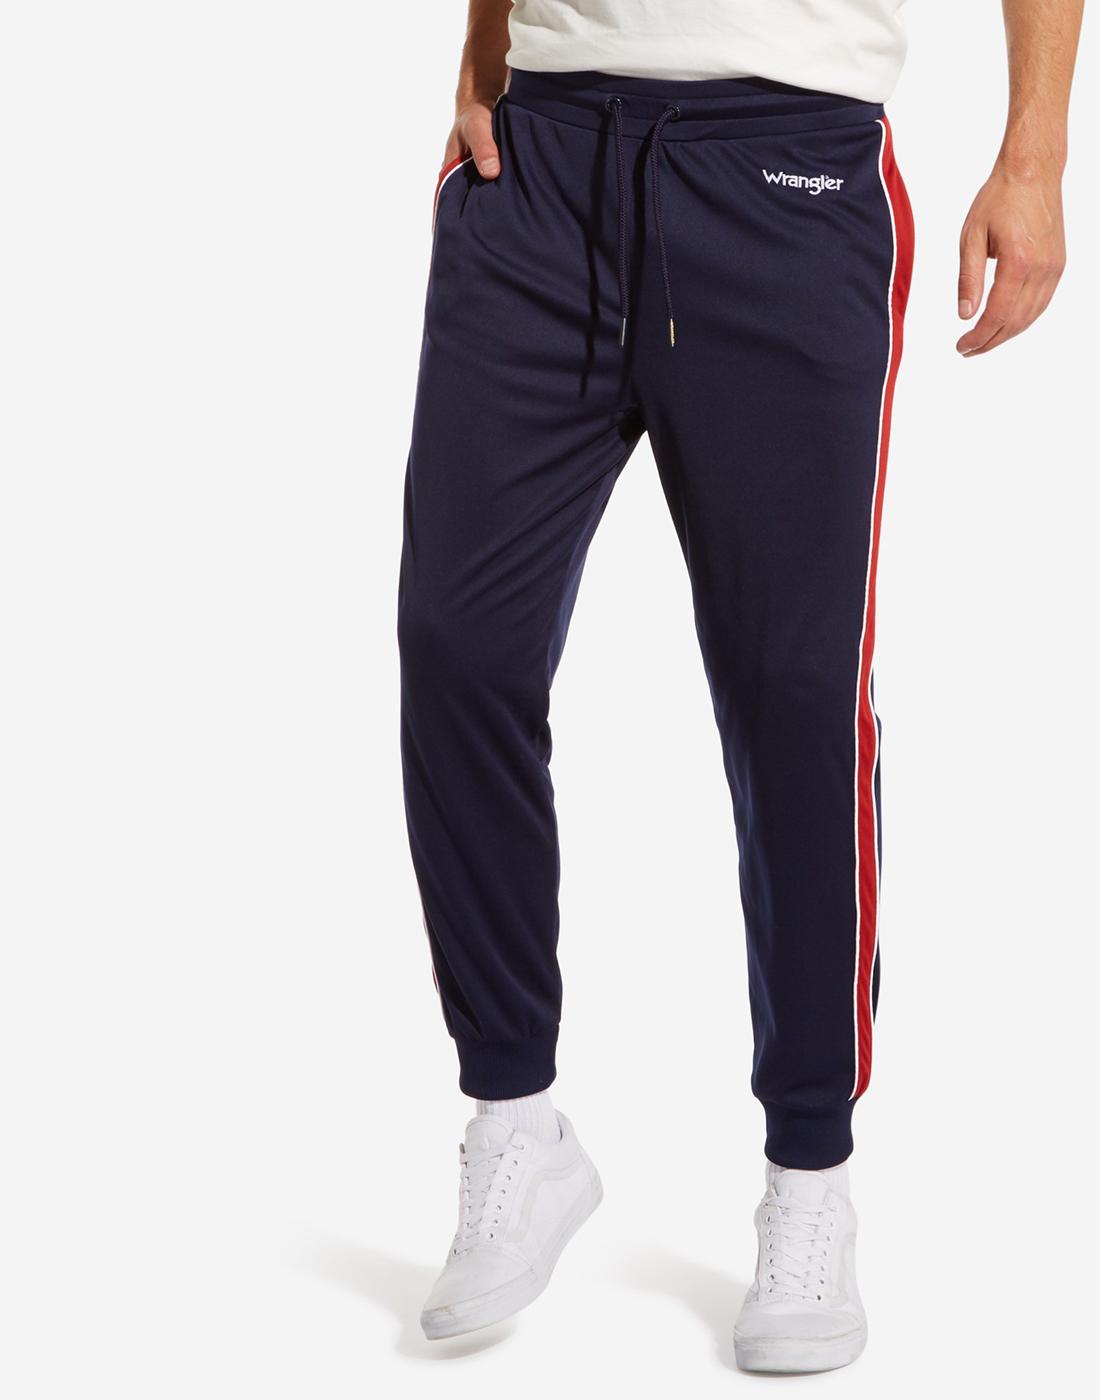 lacoste trackie bottoms